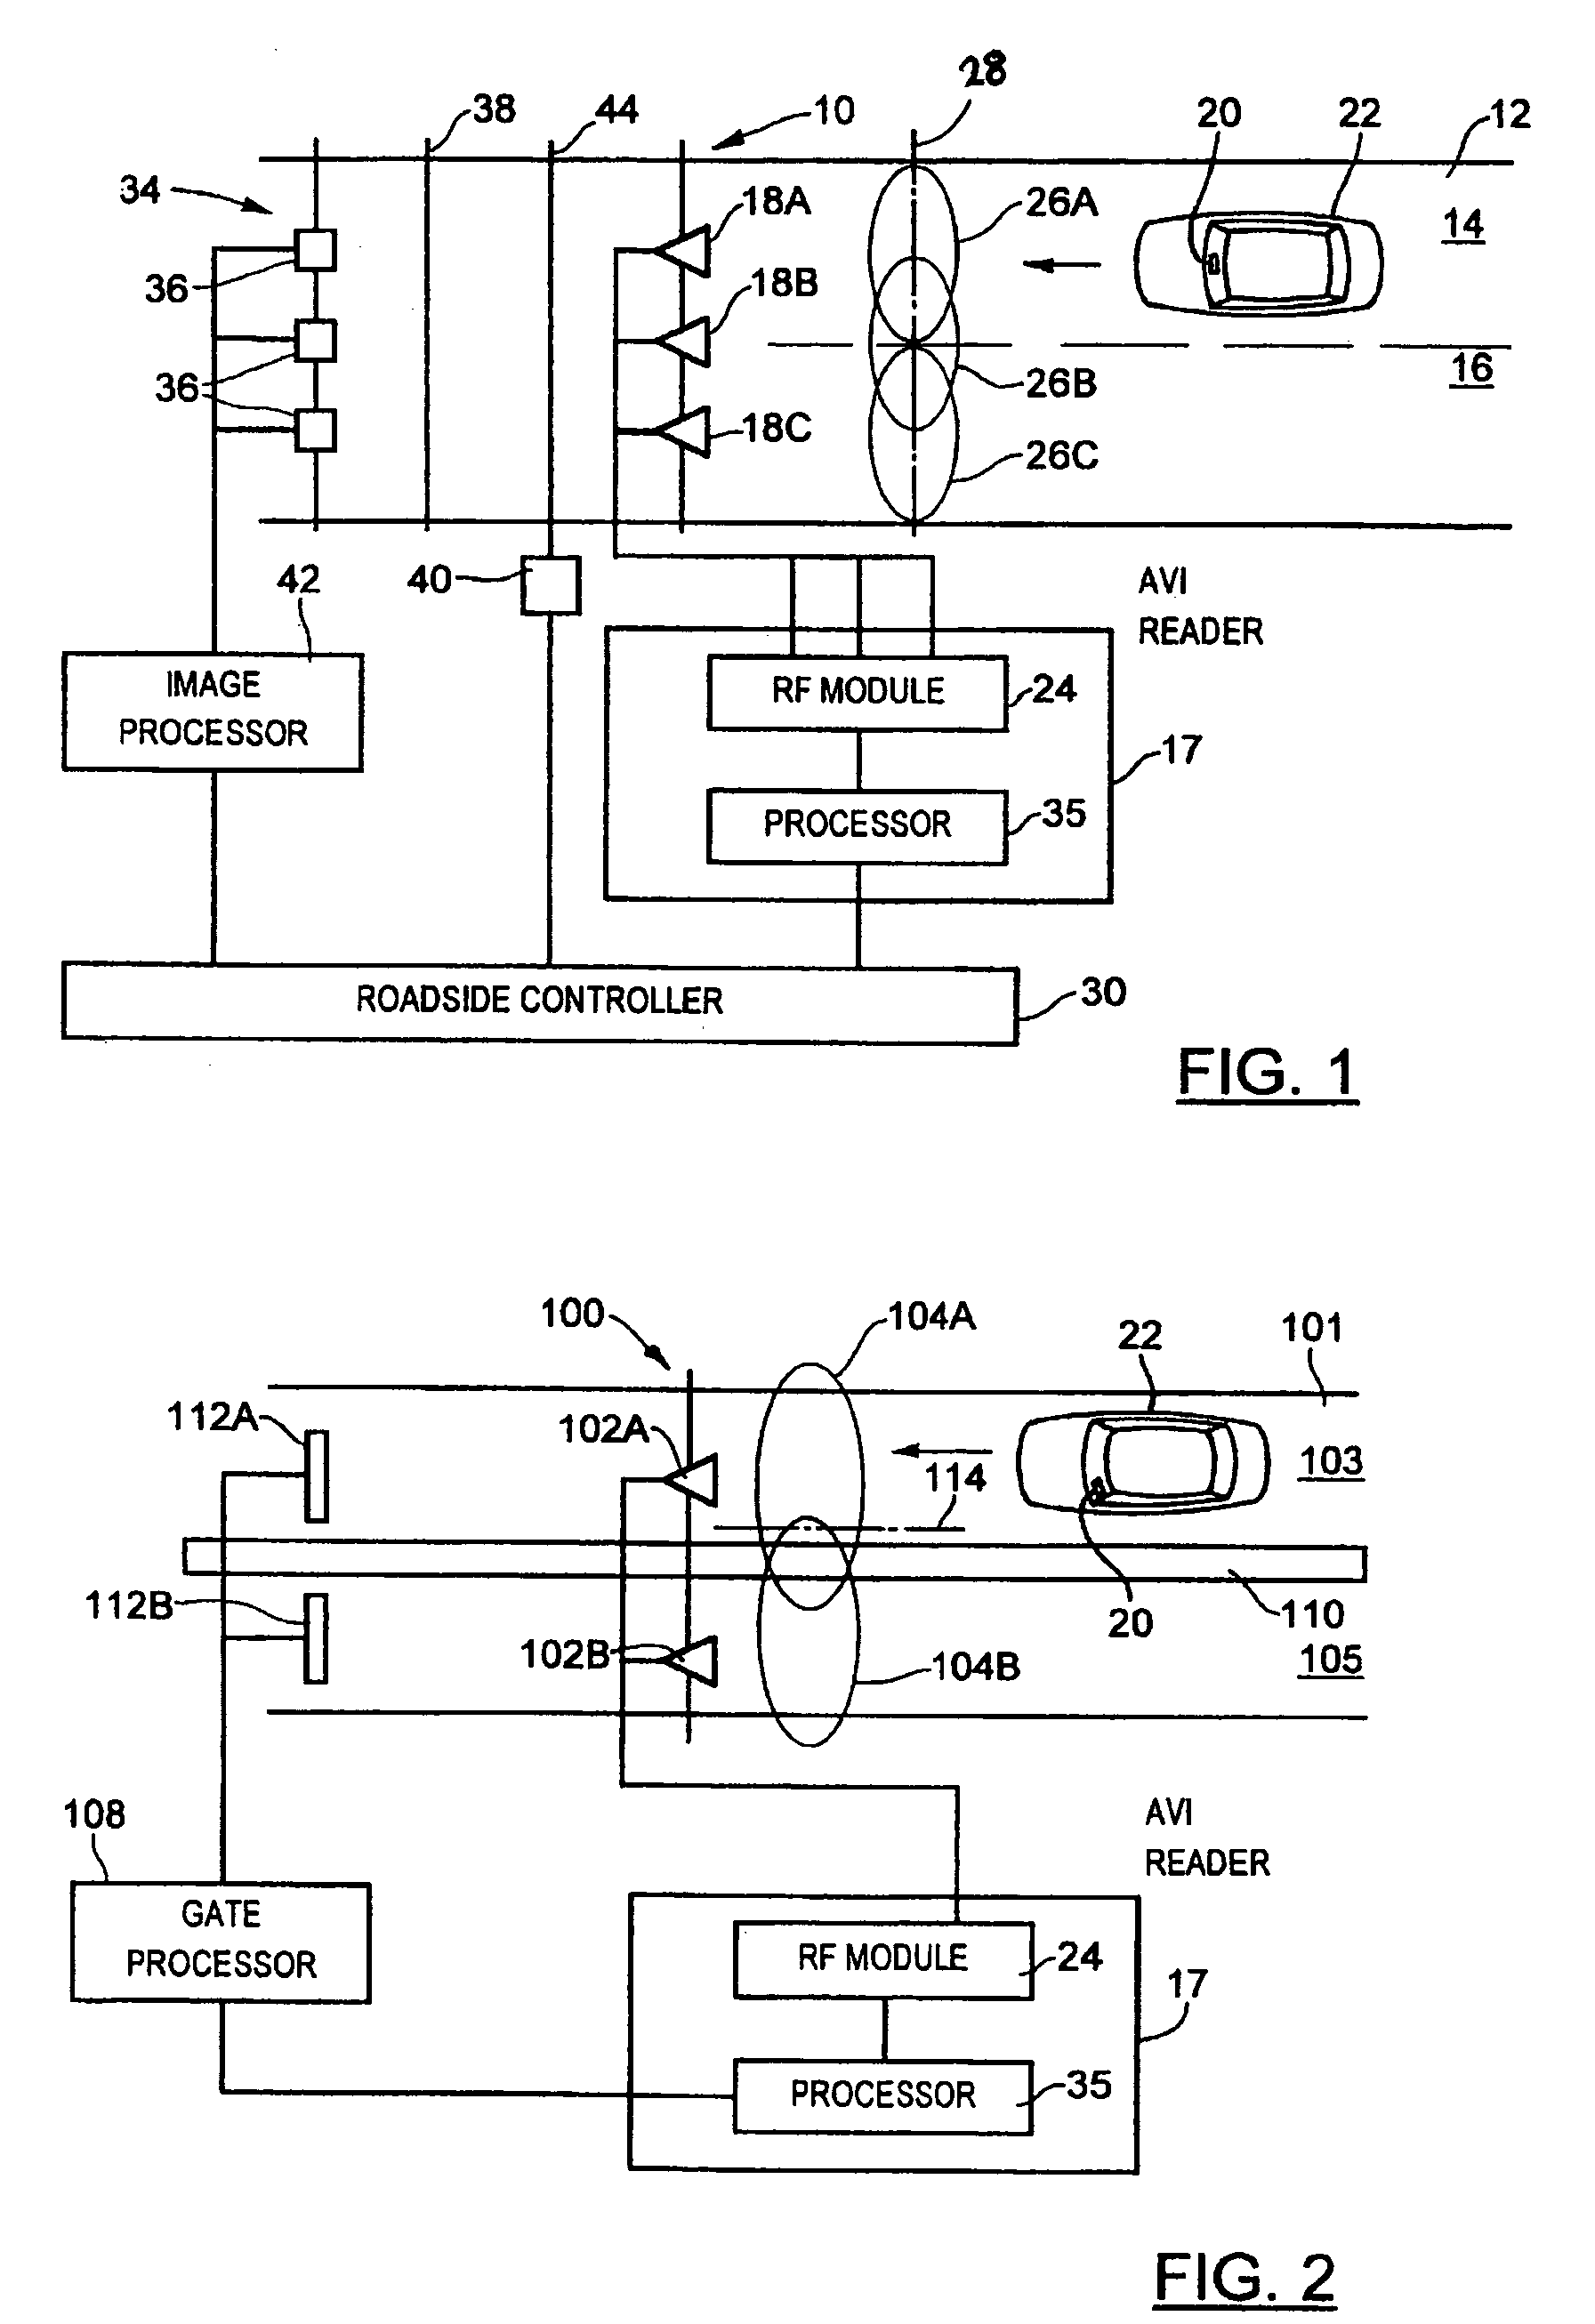 Dynamic timing adjustment in an electronic toll collection system